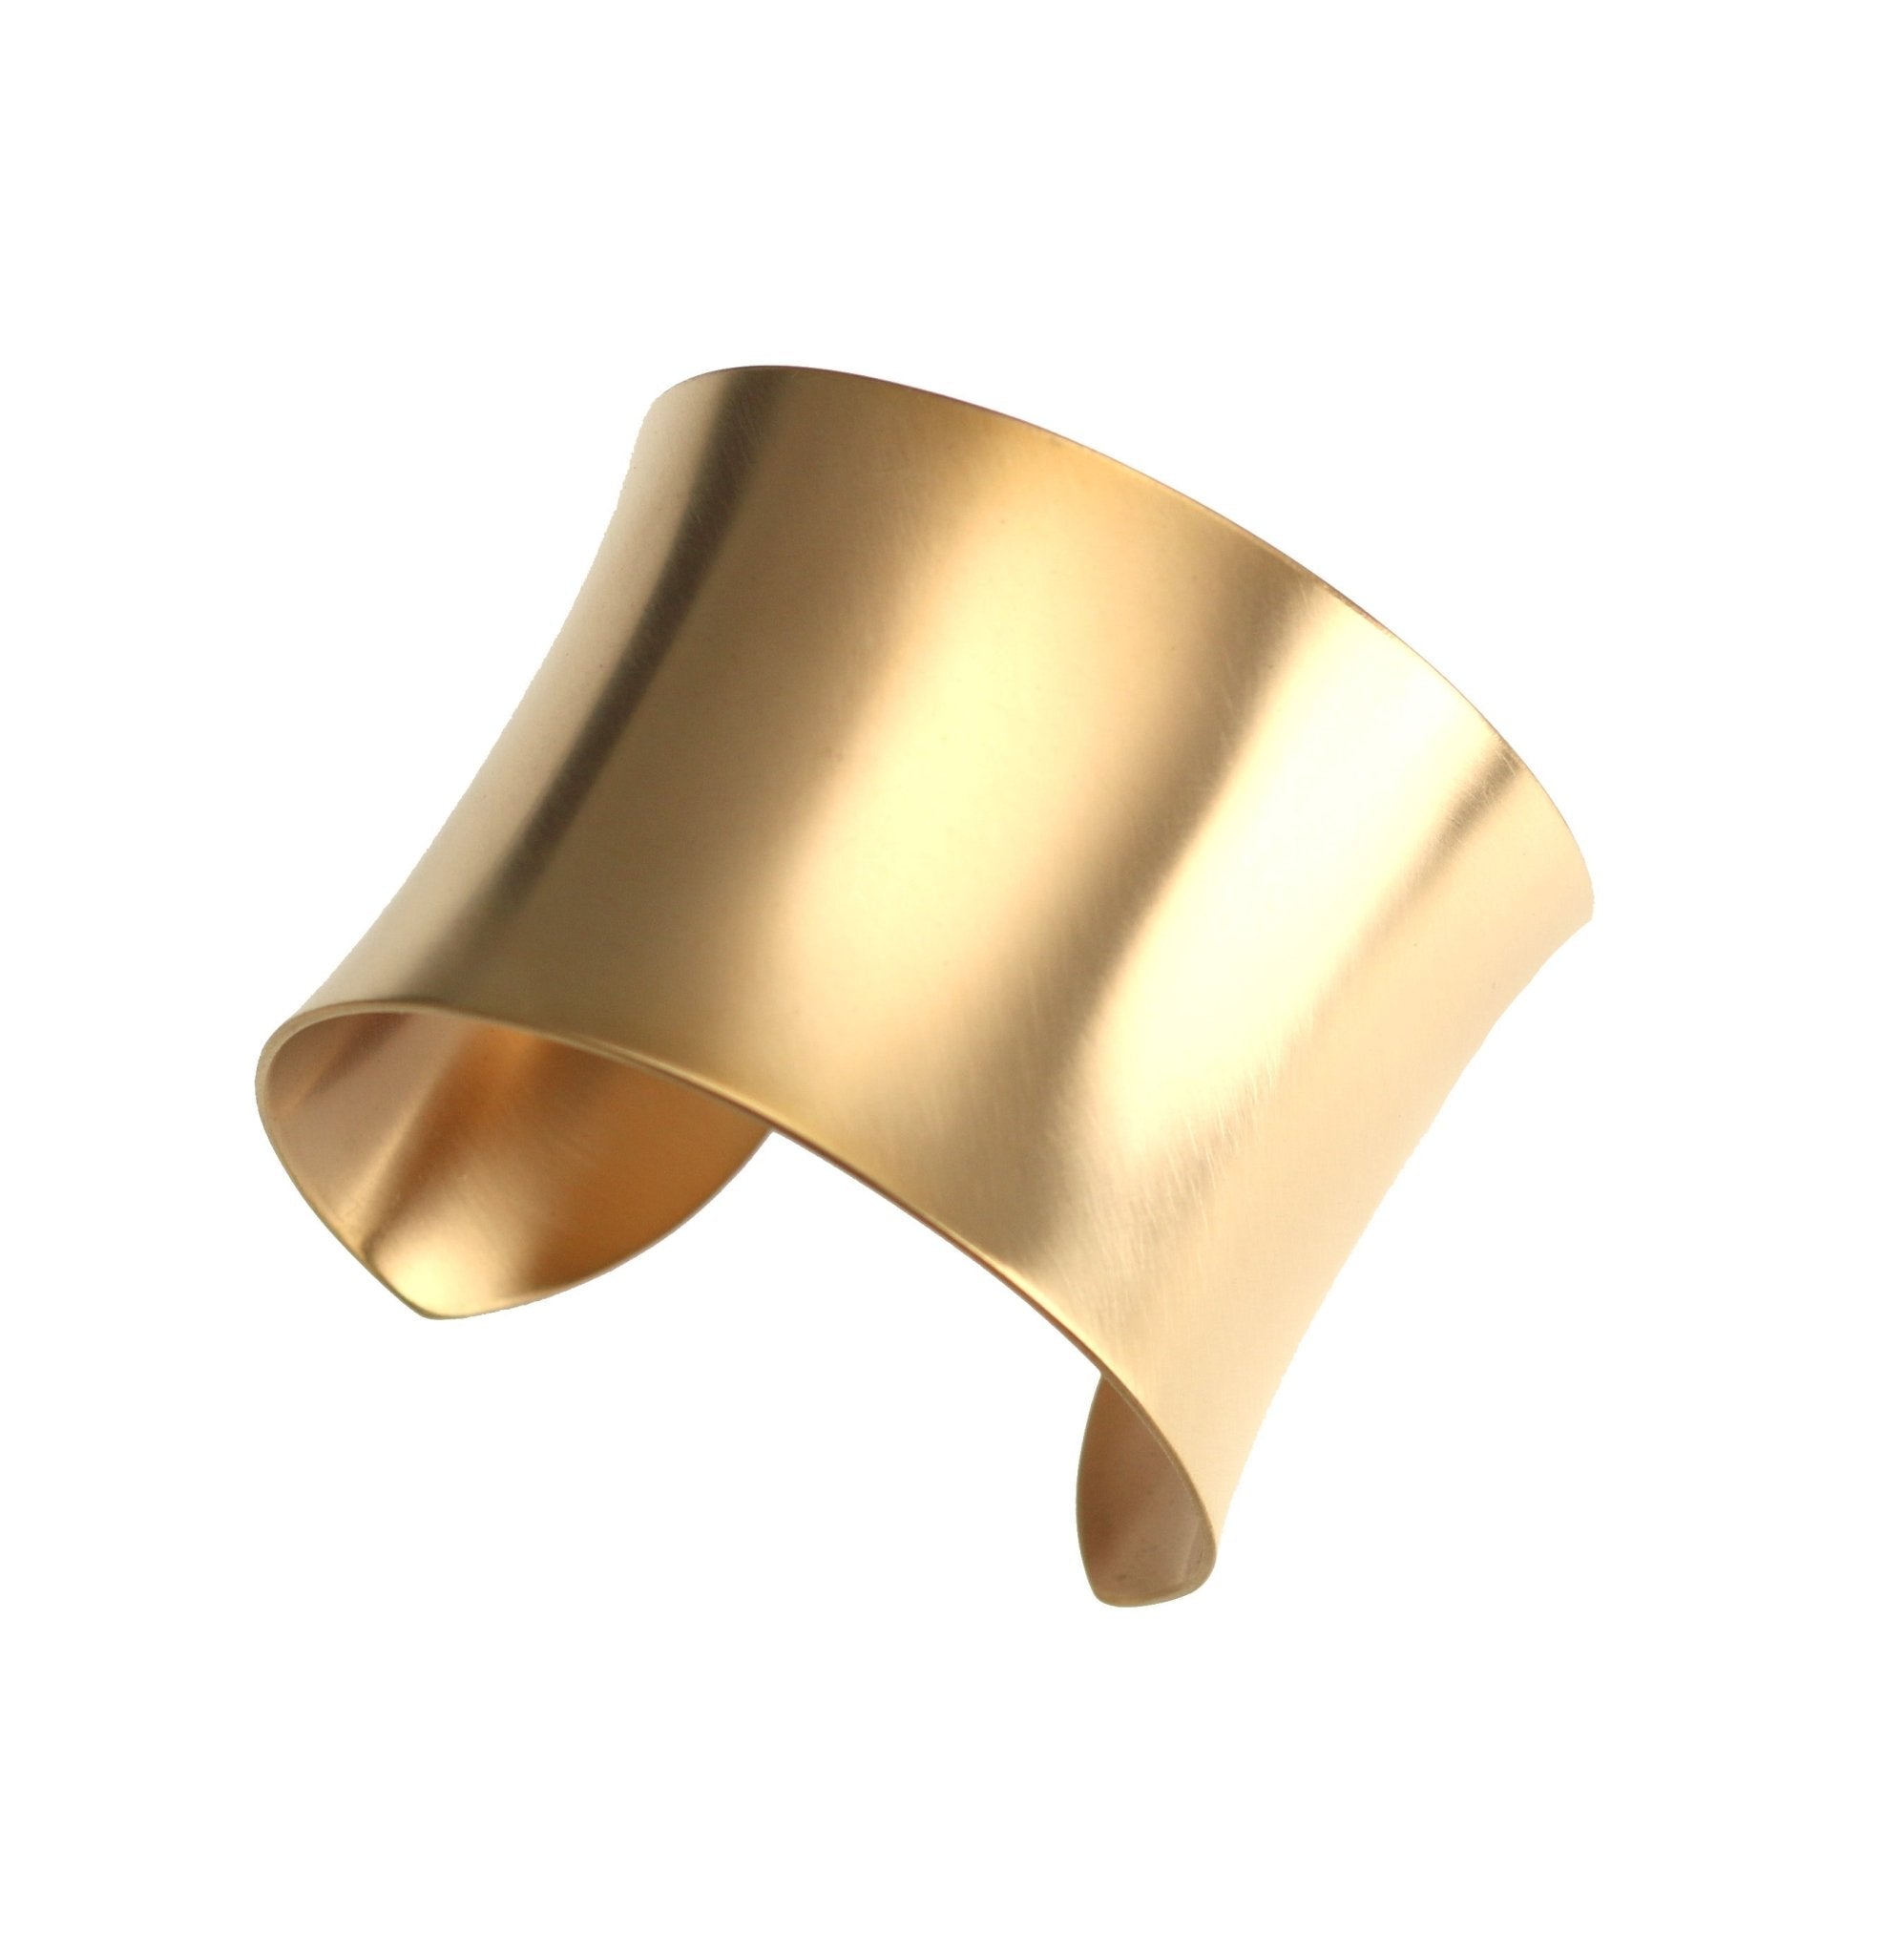 Detail View of Brushed Anticlastic Bronze Cuff Bracelet